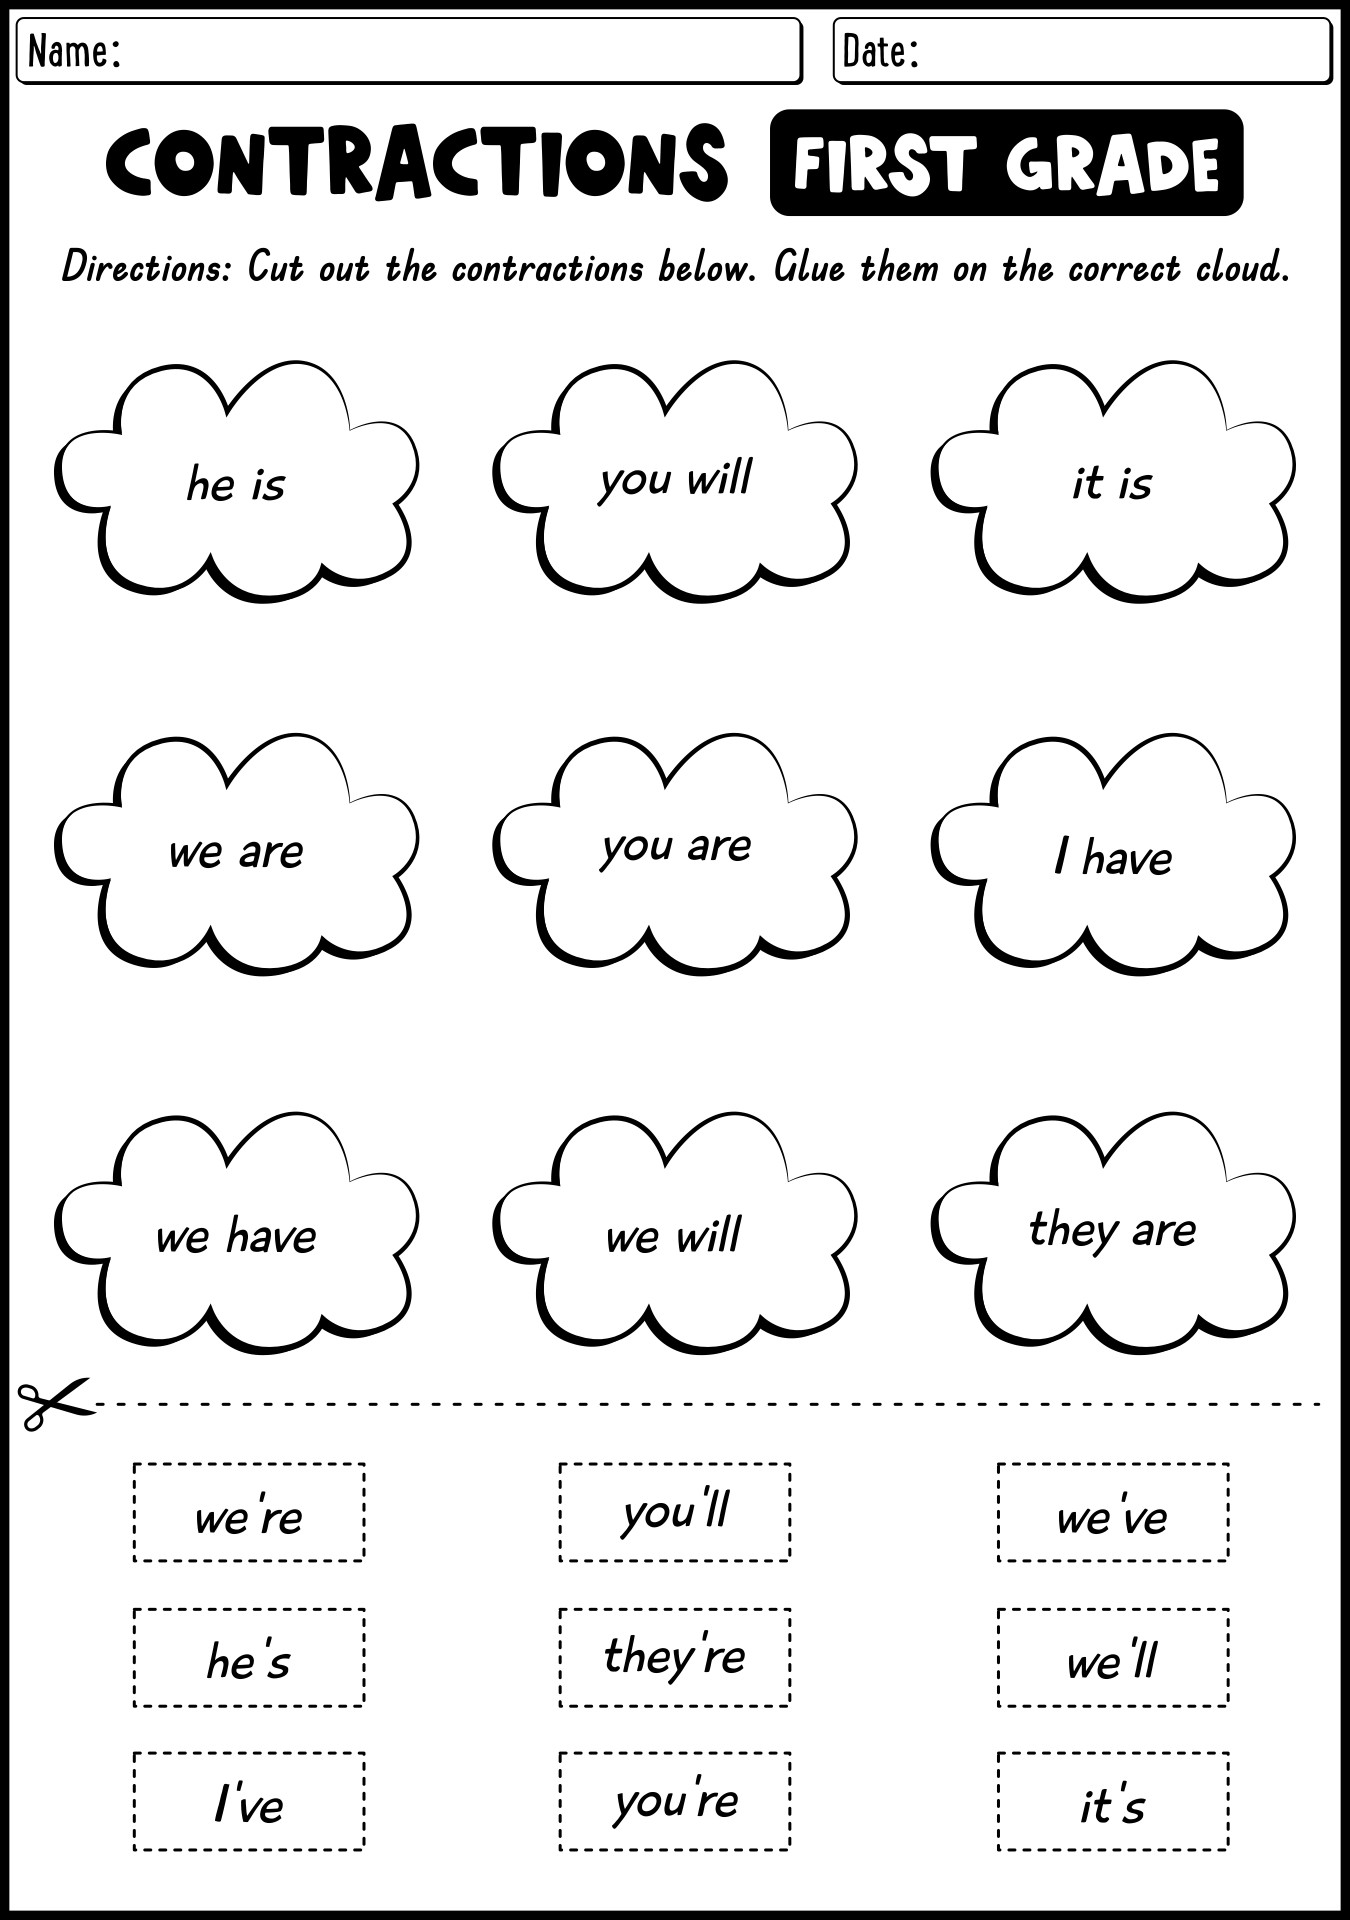 17 Best Images of For First Grade Contraction Worksheets - Contraction